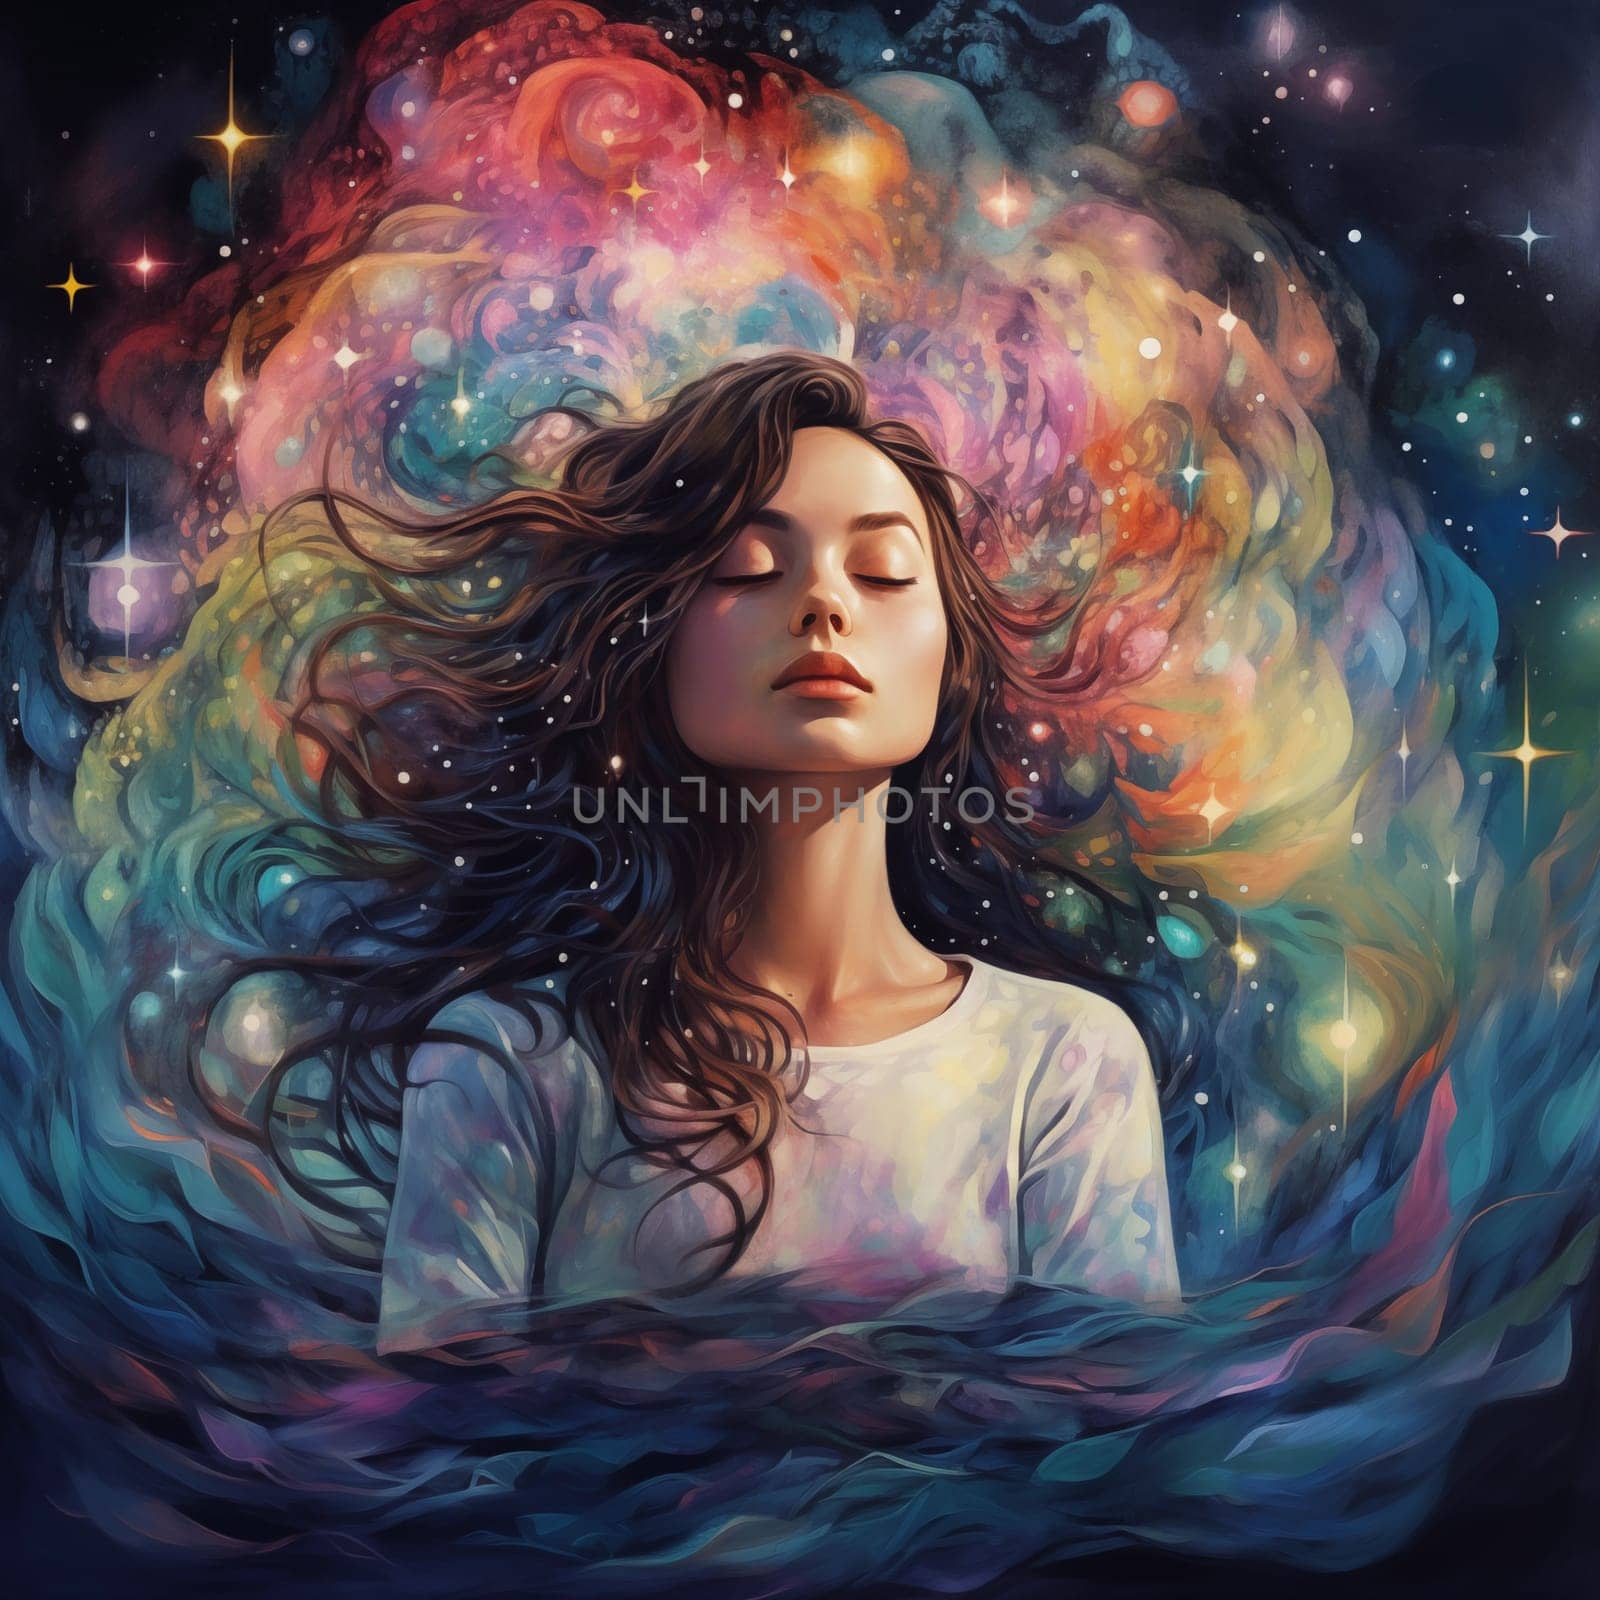 Vibrant stock illustration of a meditating girl with closed eyes and flowing hair against a cosmic backdrop with nebulae. A colorful and serene depiction capturing the essence of meditation. by veronawinner